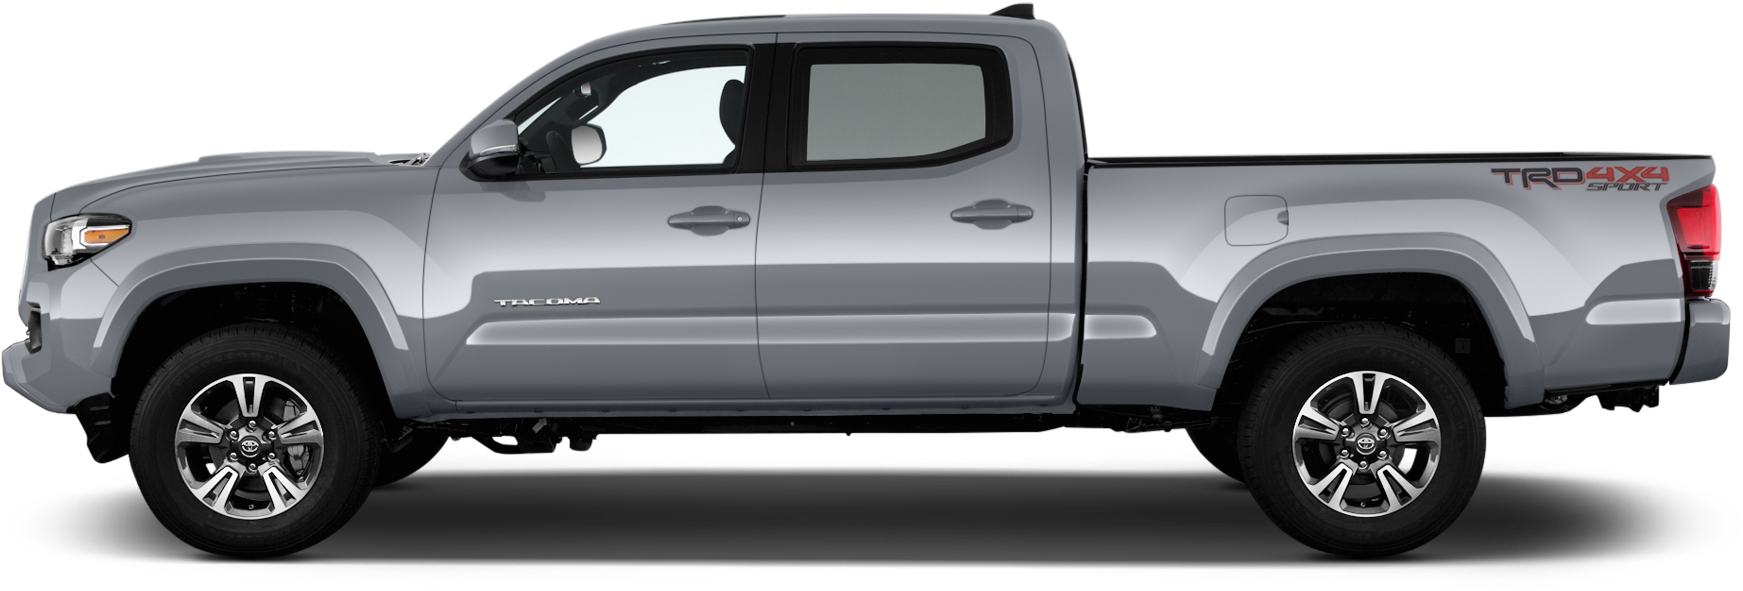 Toyota Tacoma PNG Free File Download